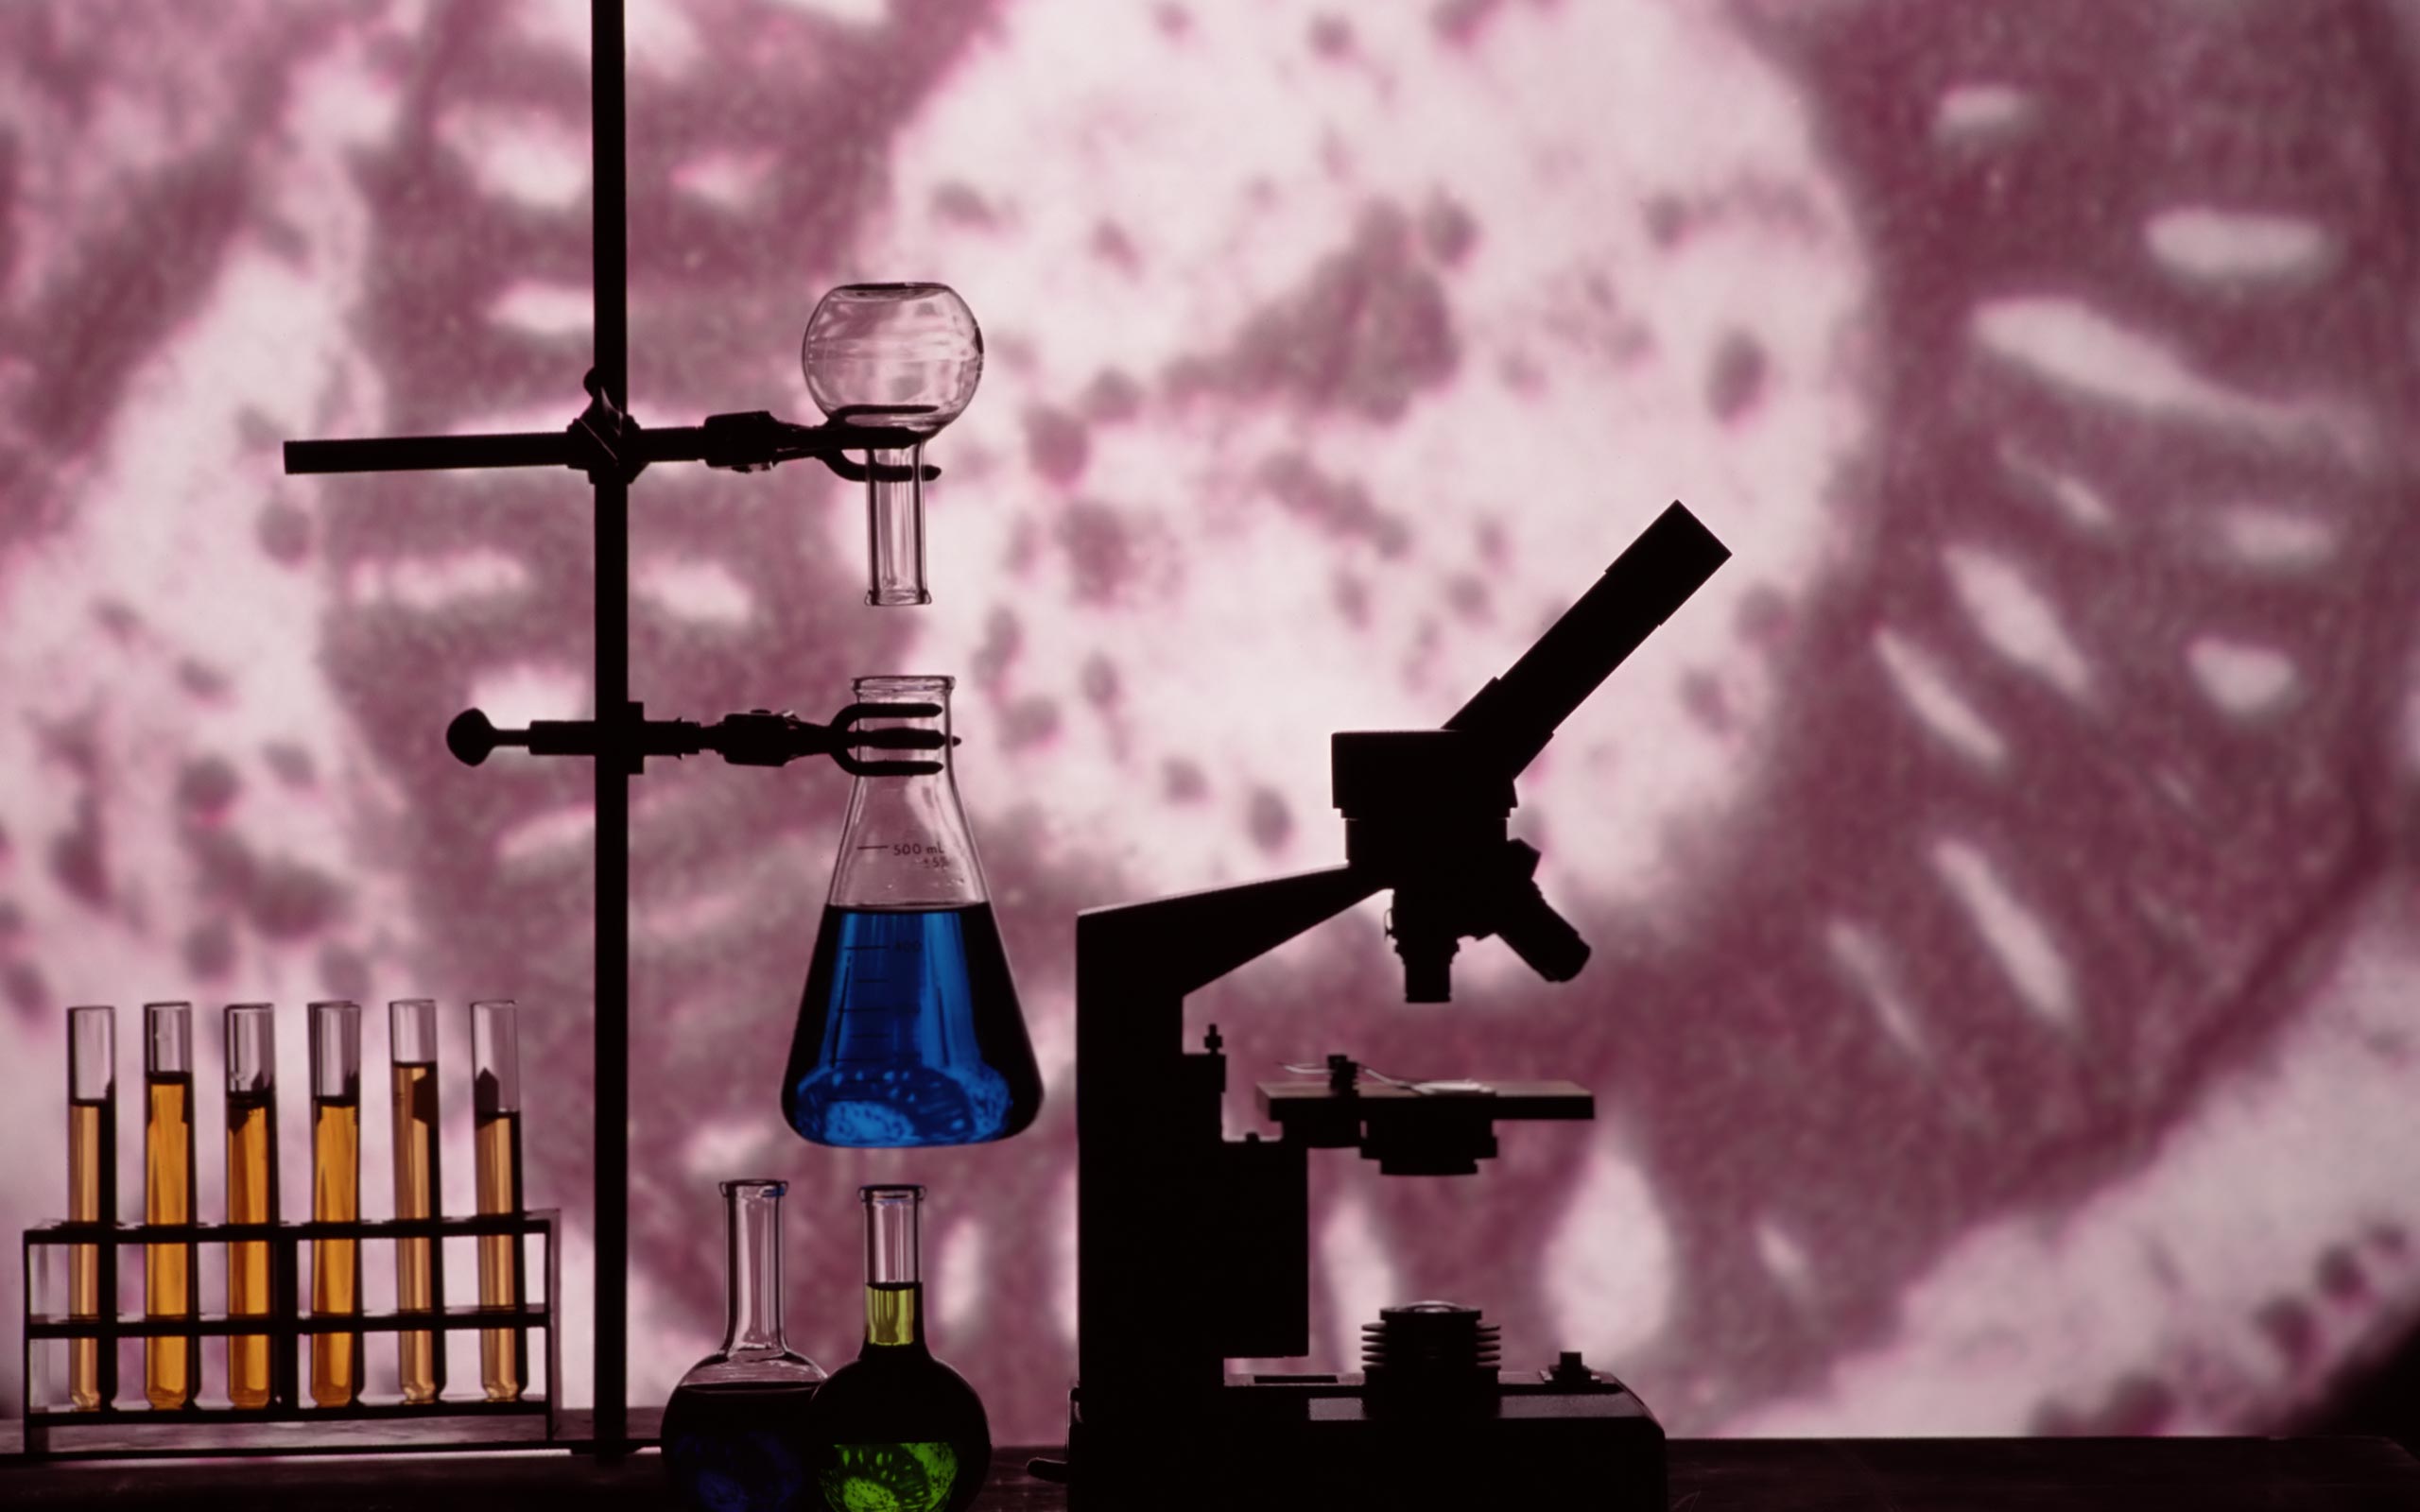 A lab with various scientific equipment and instruments - Chemistry